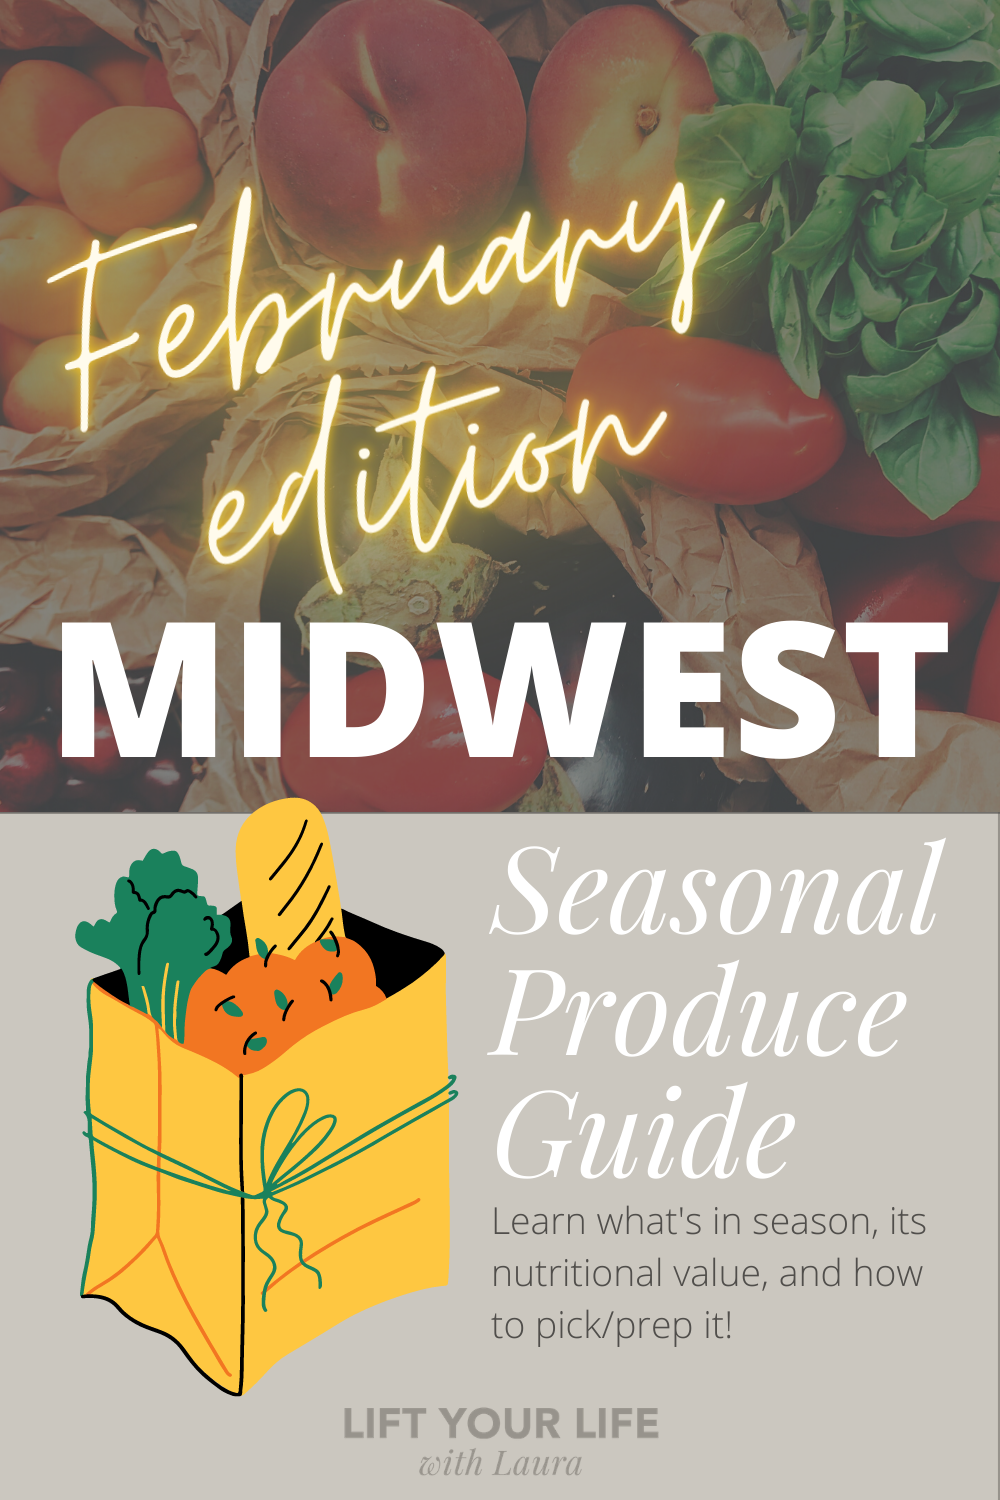 Yes, it's still cold, but the promise of spring is closer for us Midwesterners!  Some of February's produce is the same as January, but this month we have the lovely addition of Endive and Radicchio. Seasonal produce guide midwest, seasonal produce guide february, seasonal produce guide, midwest seasonal produce, midwest food, midwest foodie blog, midwest food recipes, midwest food main dishes, ohio food recipes, ohio food recipes taste of home